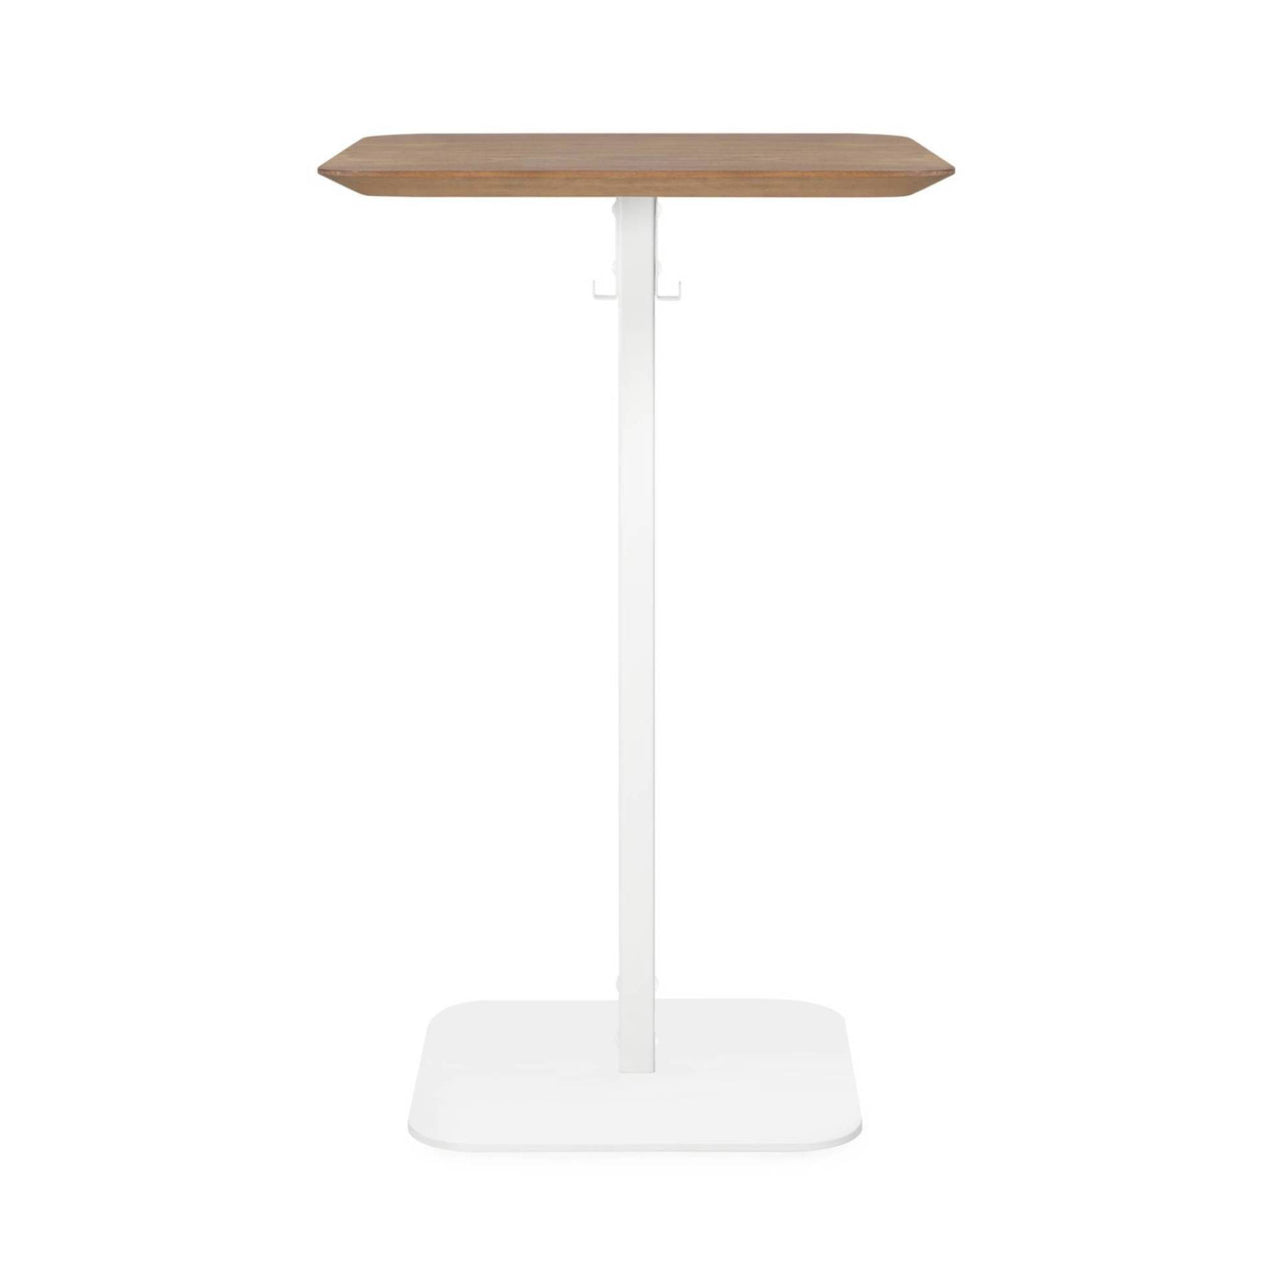 B-Around Square Table: Extra Large + Tall + White